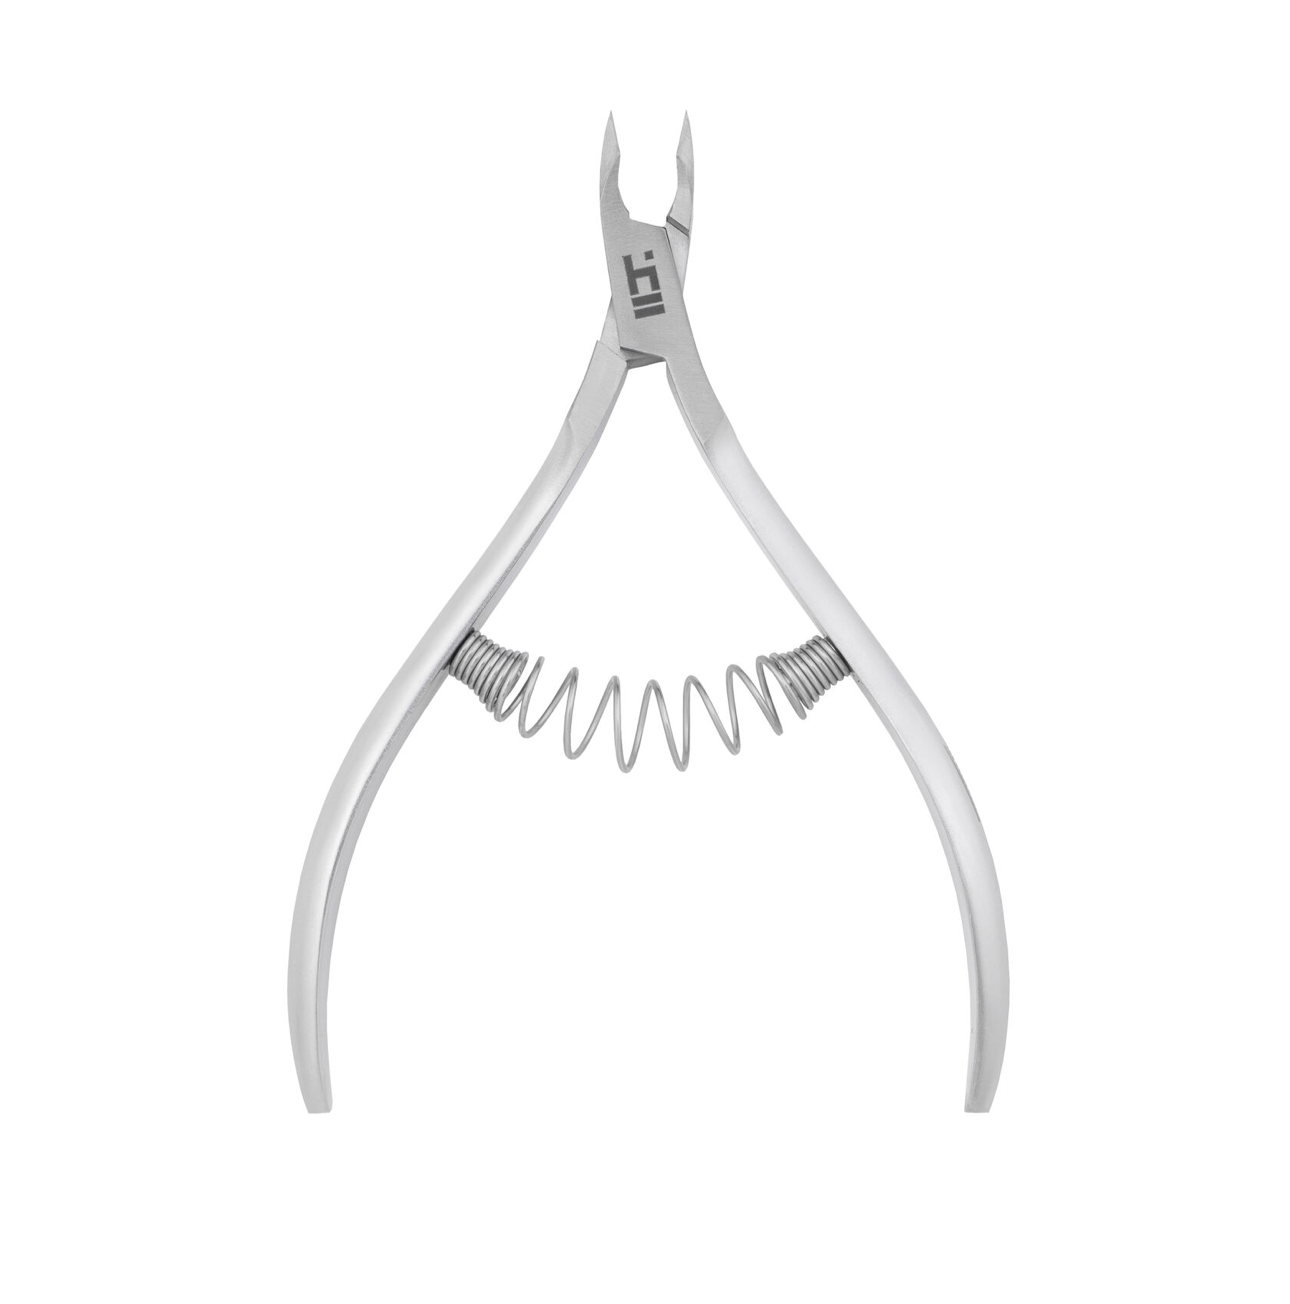 NXS-7-5 Professional cuticle nippers